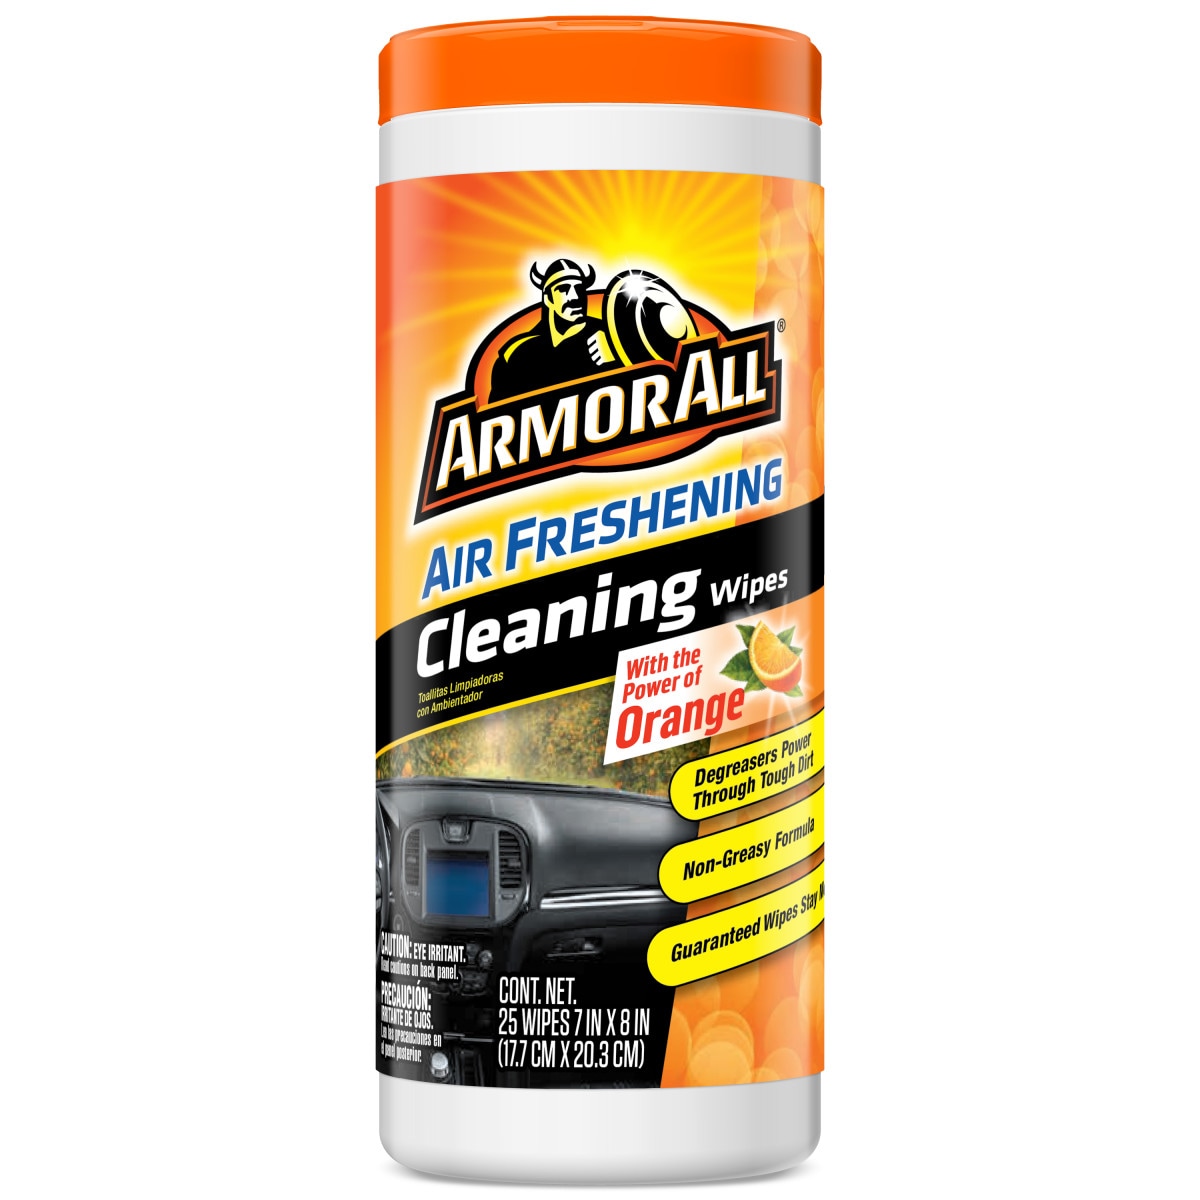  Armor All Interior Cleaner Car Leather Wipes, For